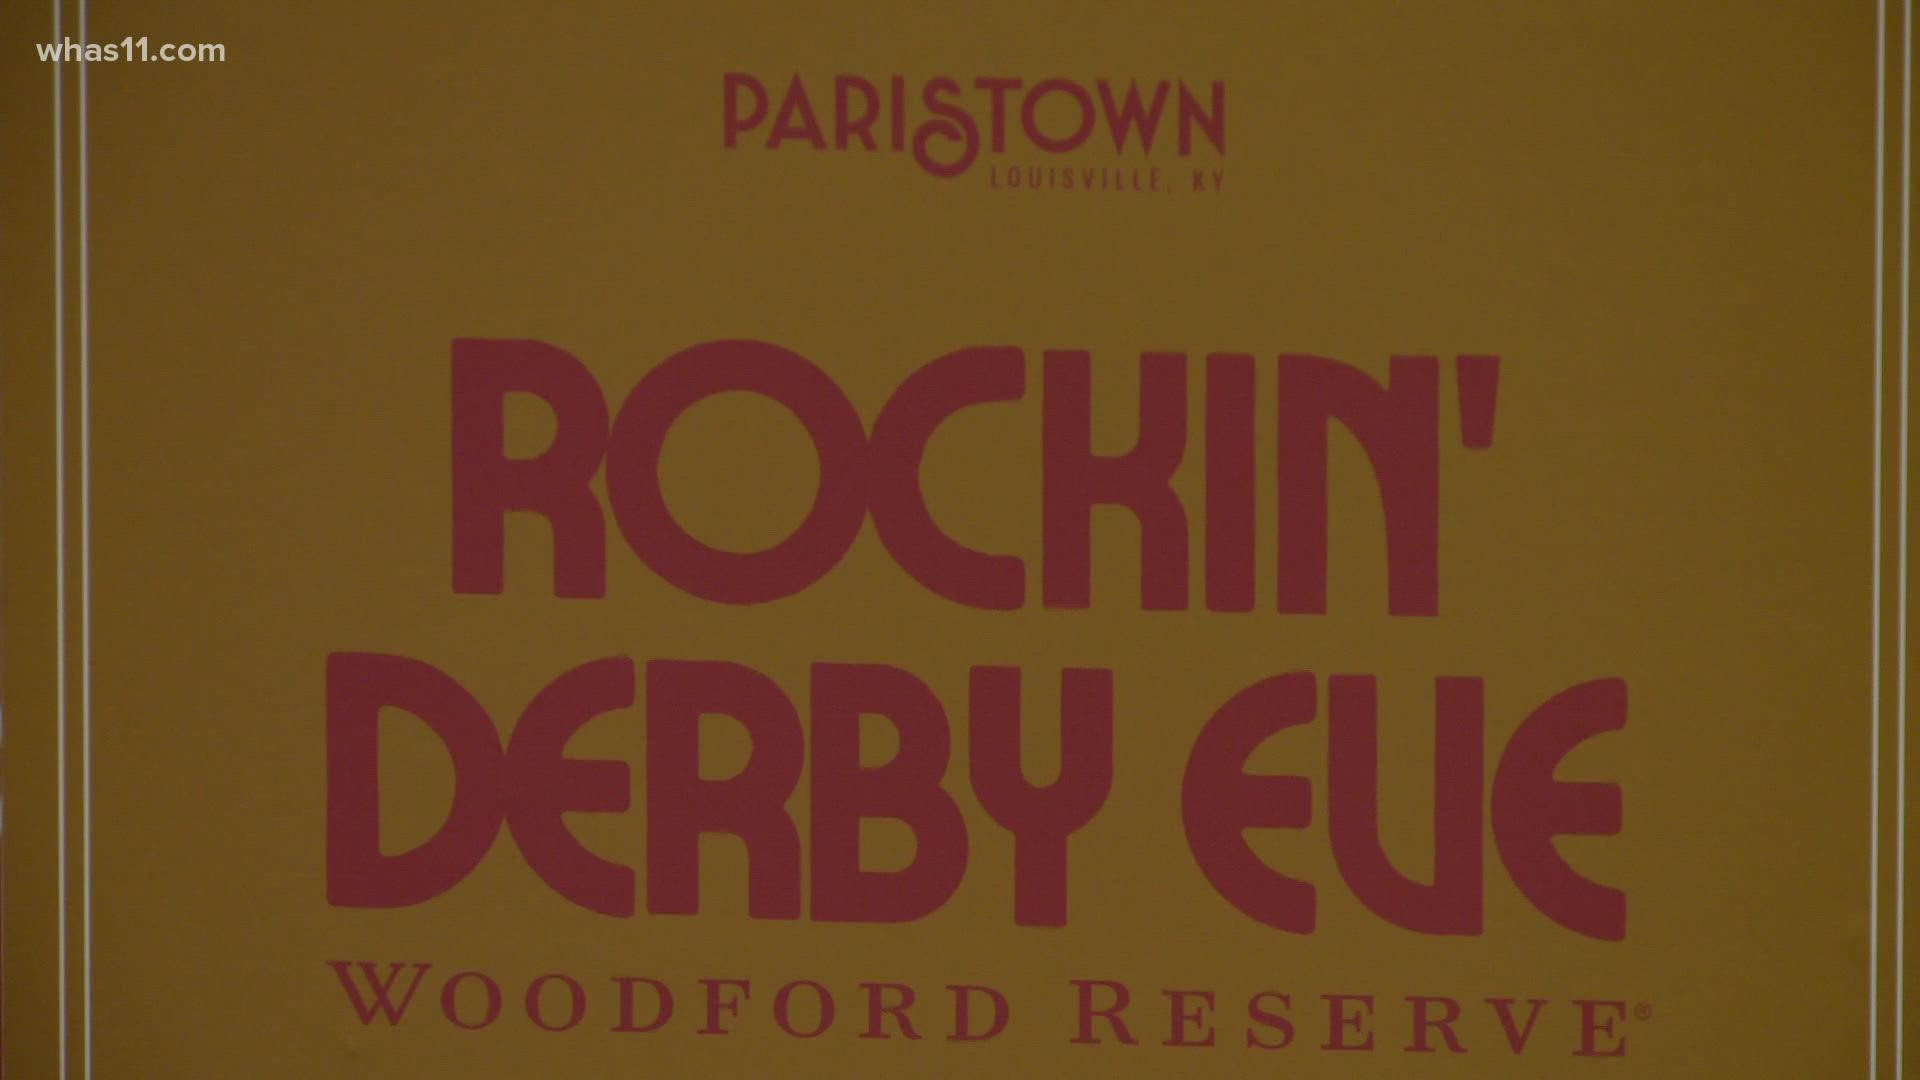 As excitement builds for the 148th Kentucky Derby, Paristown is getting ready for the inaugural “Rockin’ Derby Eve” celebration.